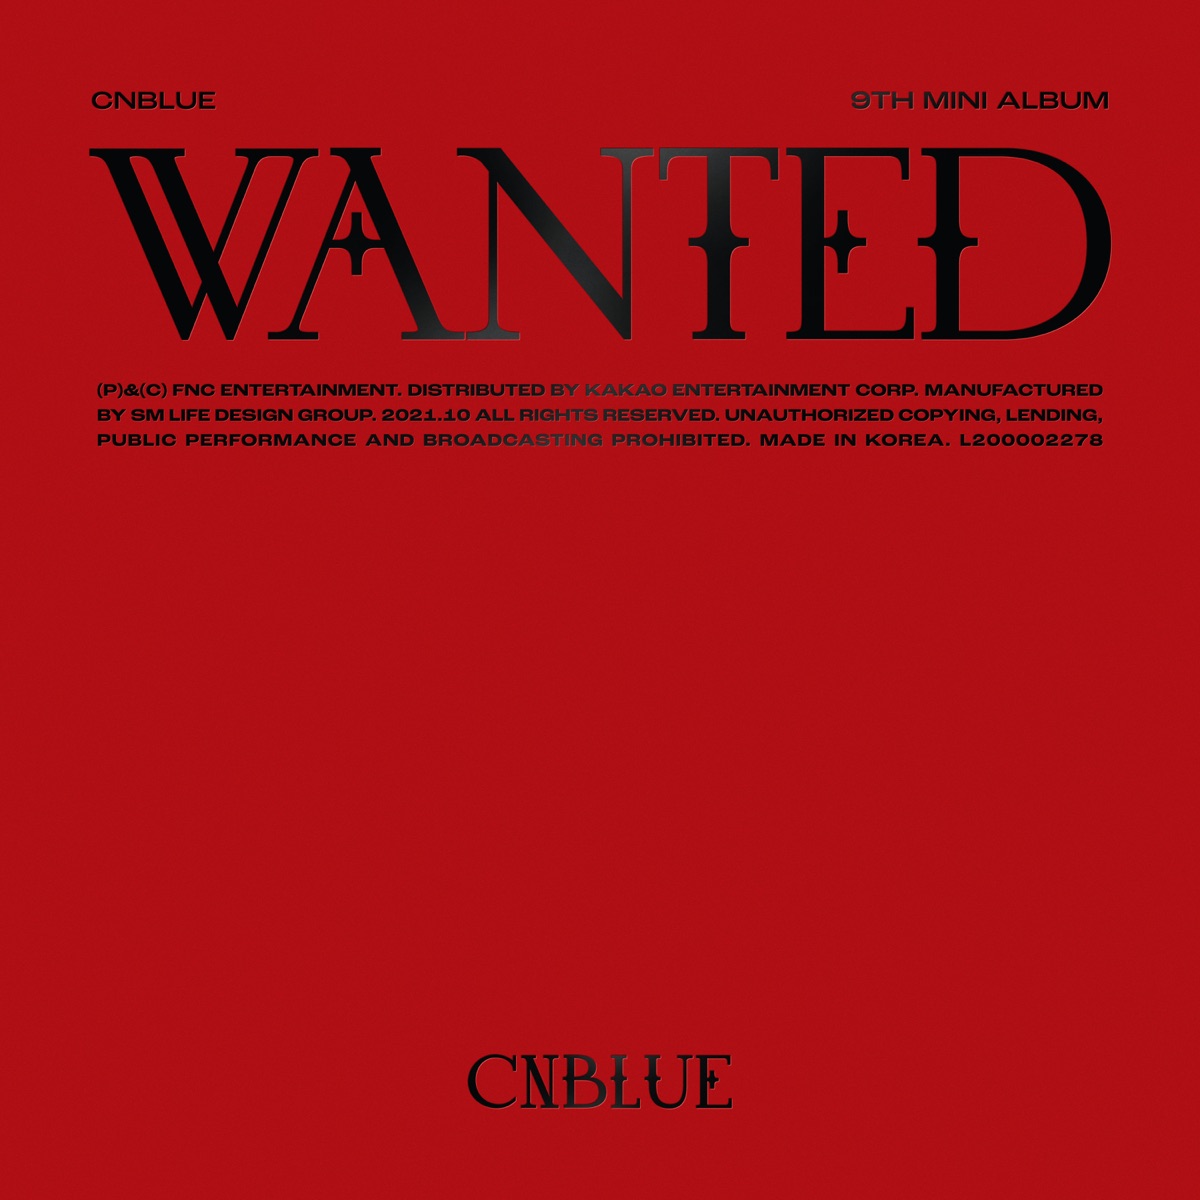 『CNBLUE - Hold Me Back 歌詞』収録の『WANTED』ジャケット